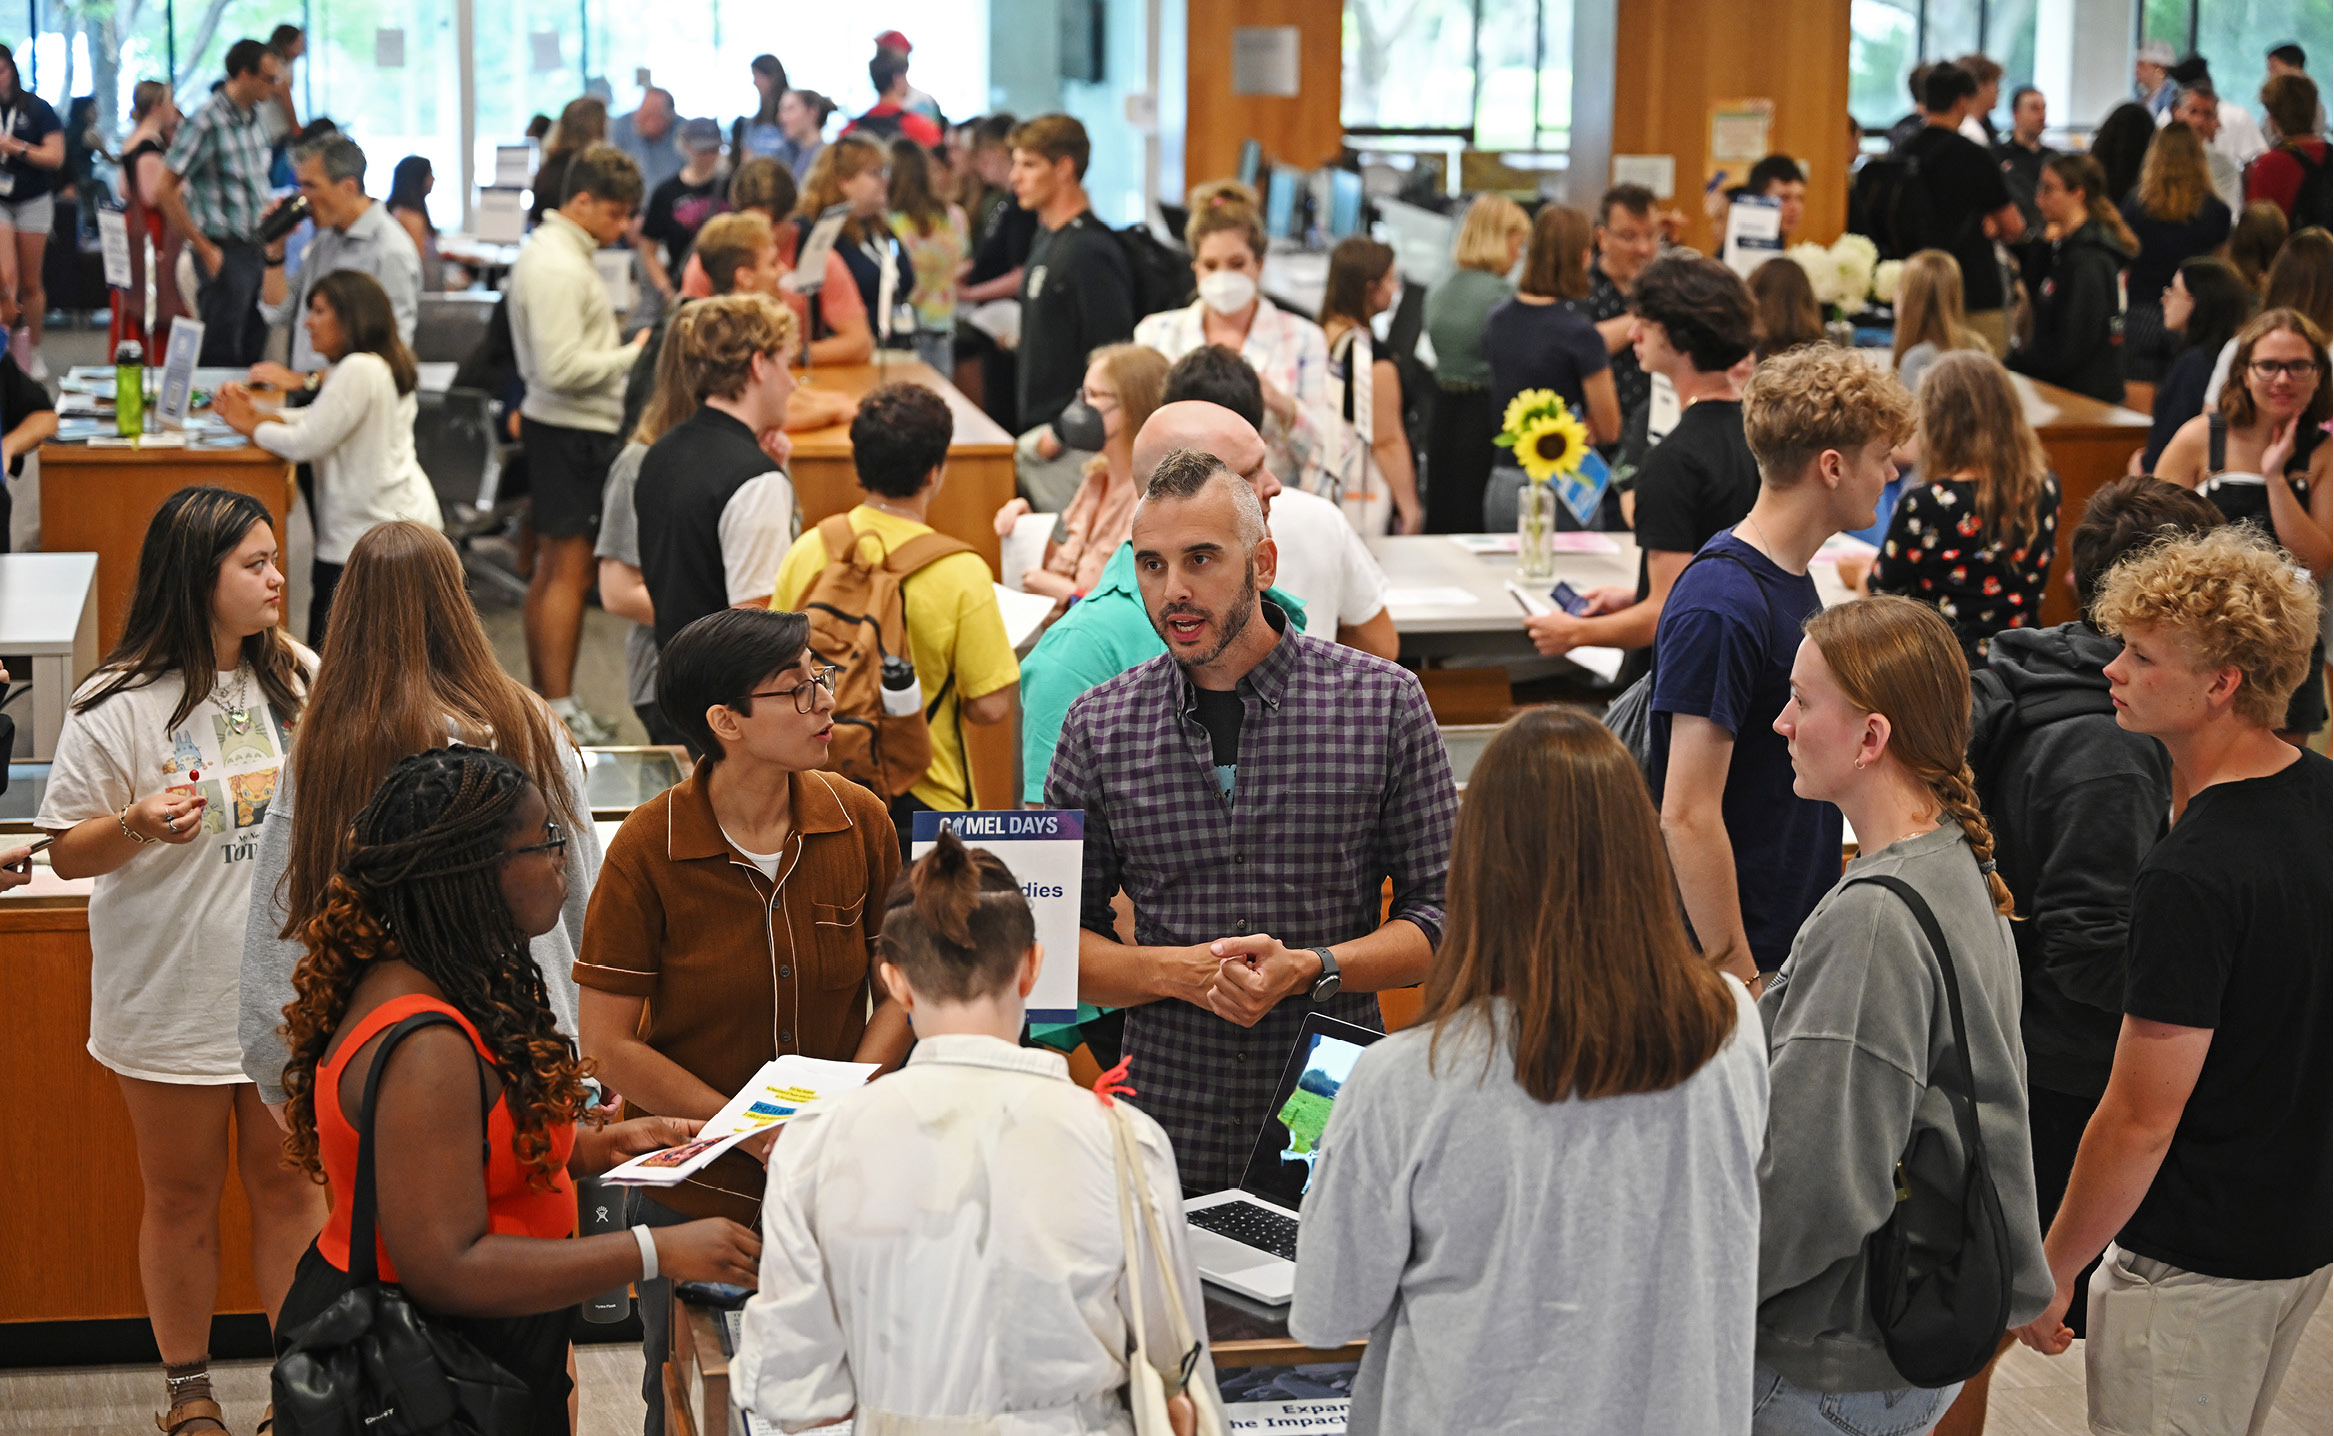 Frst year students talk with faculty members at the Academic Fair at Welcome Weekend.